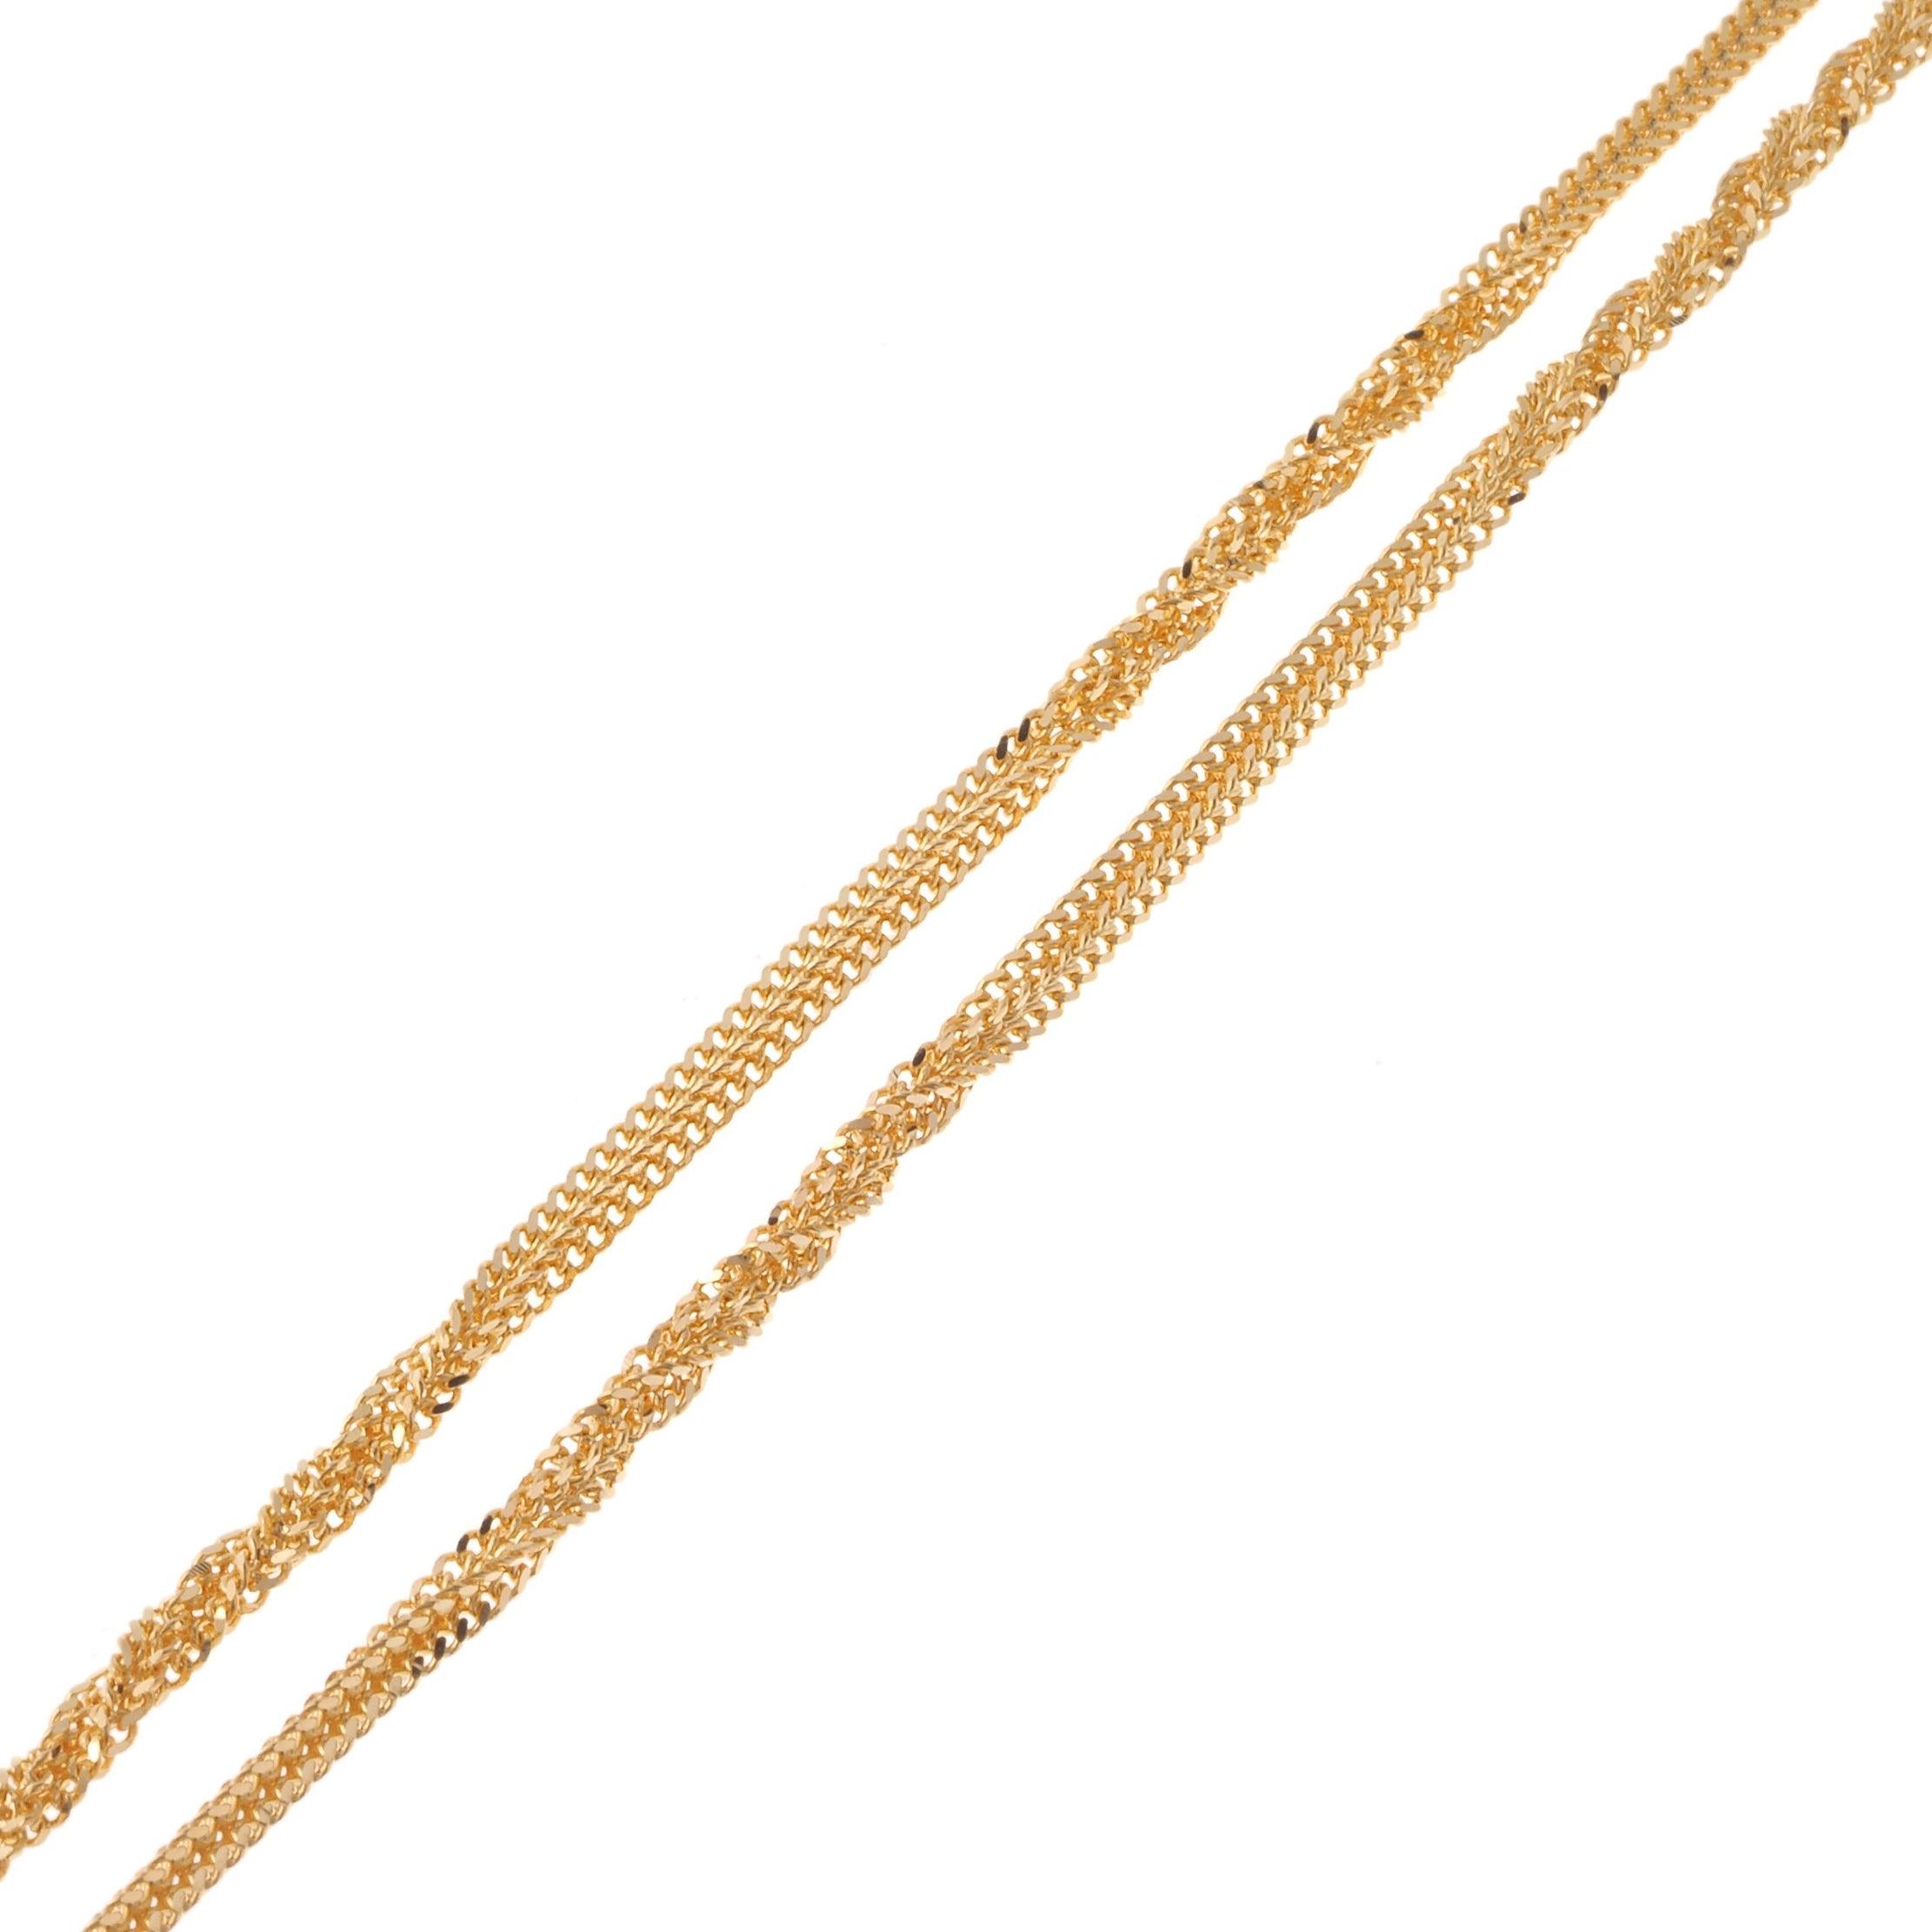 22ct Gold Chain with Twisted Design C-6222 - Minar Jewellers